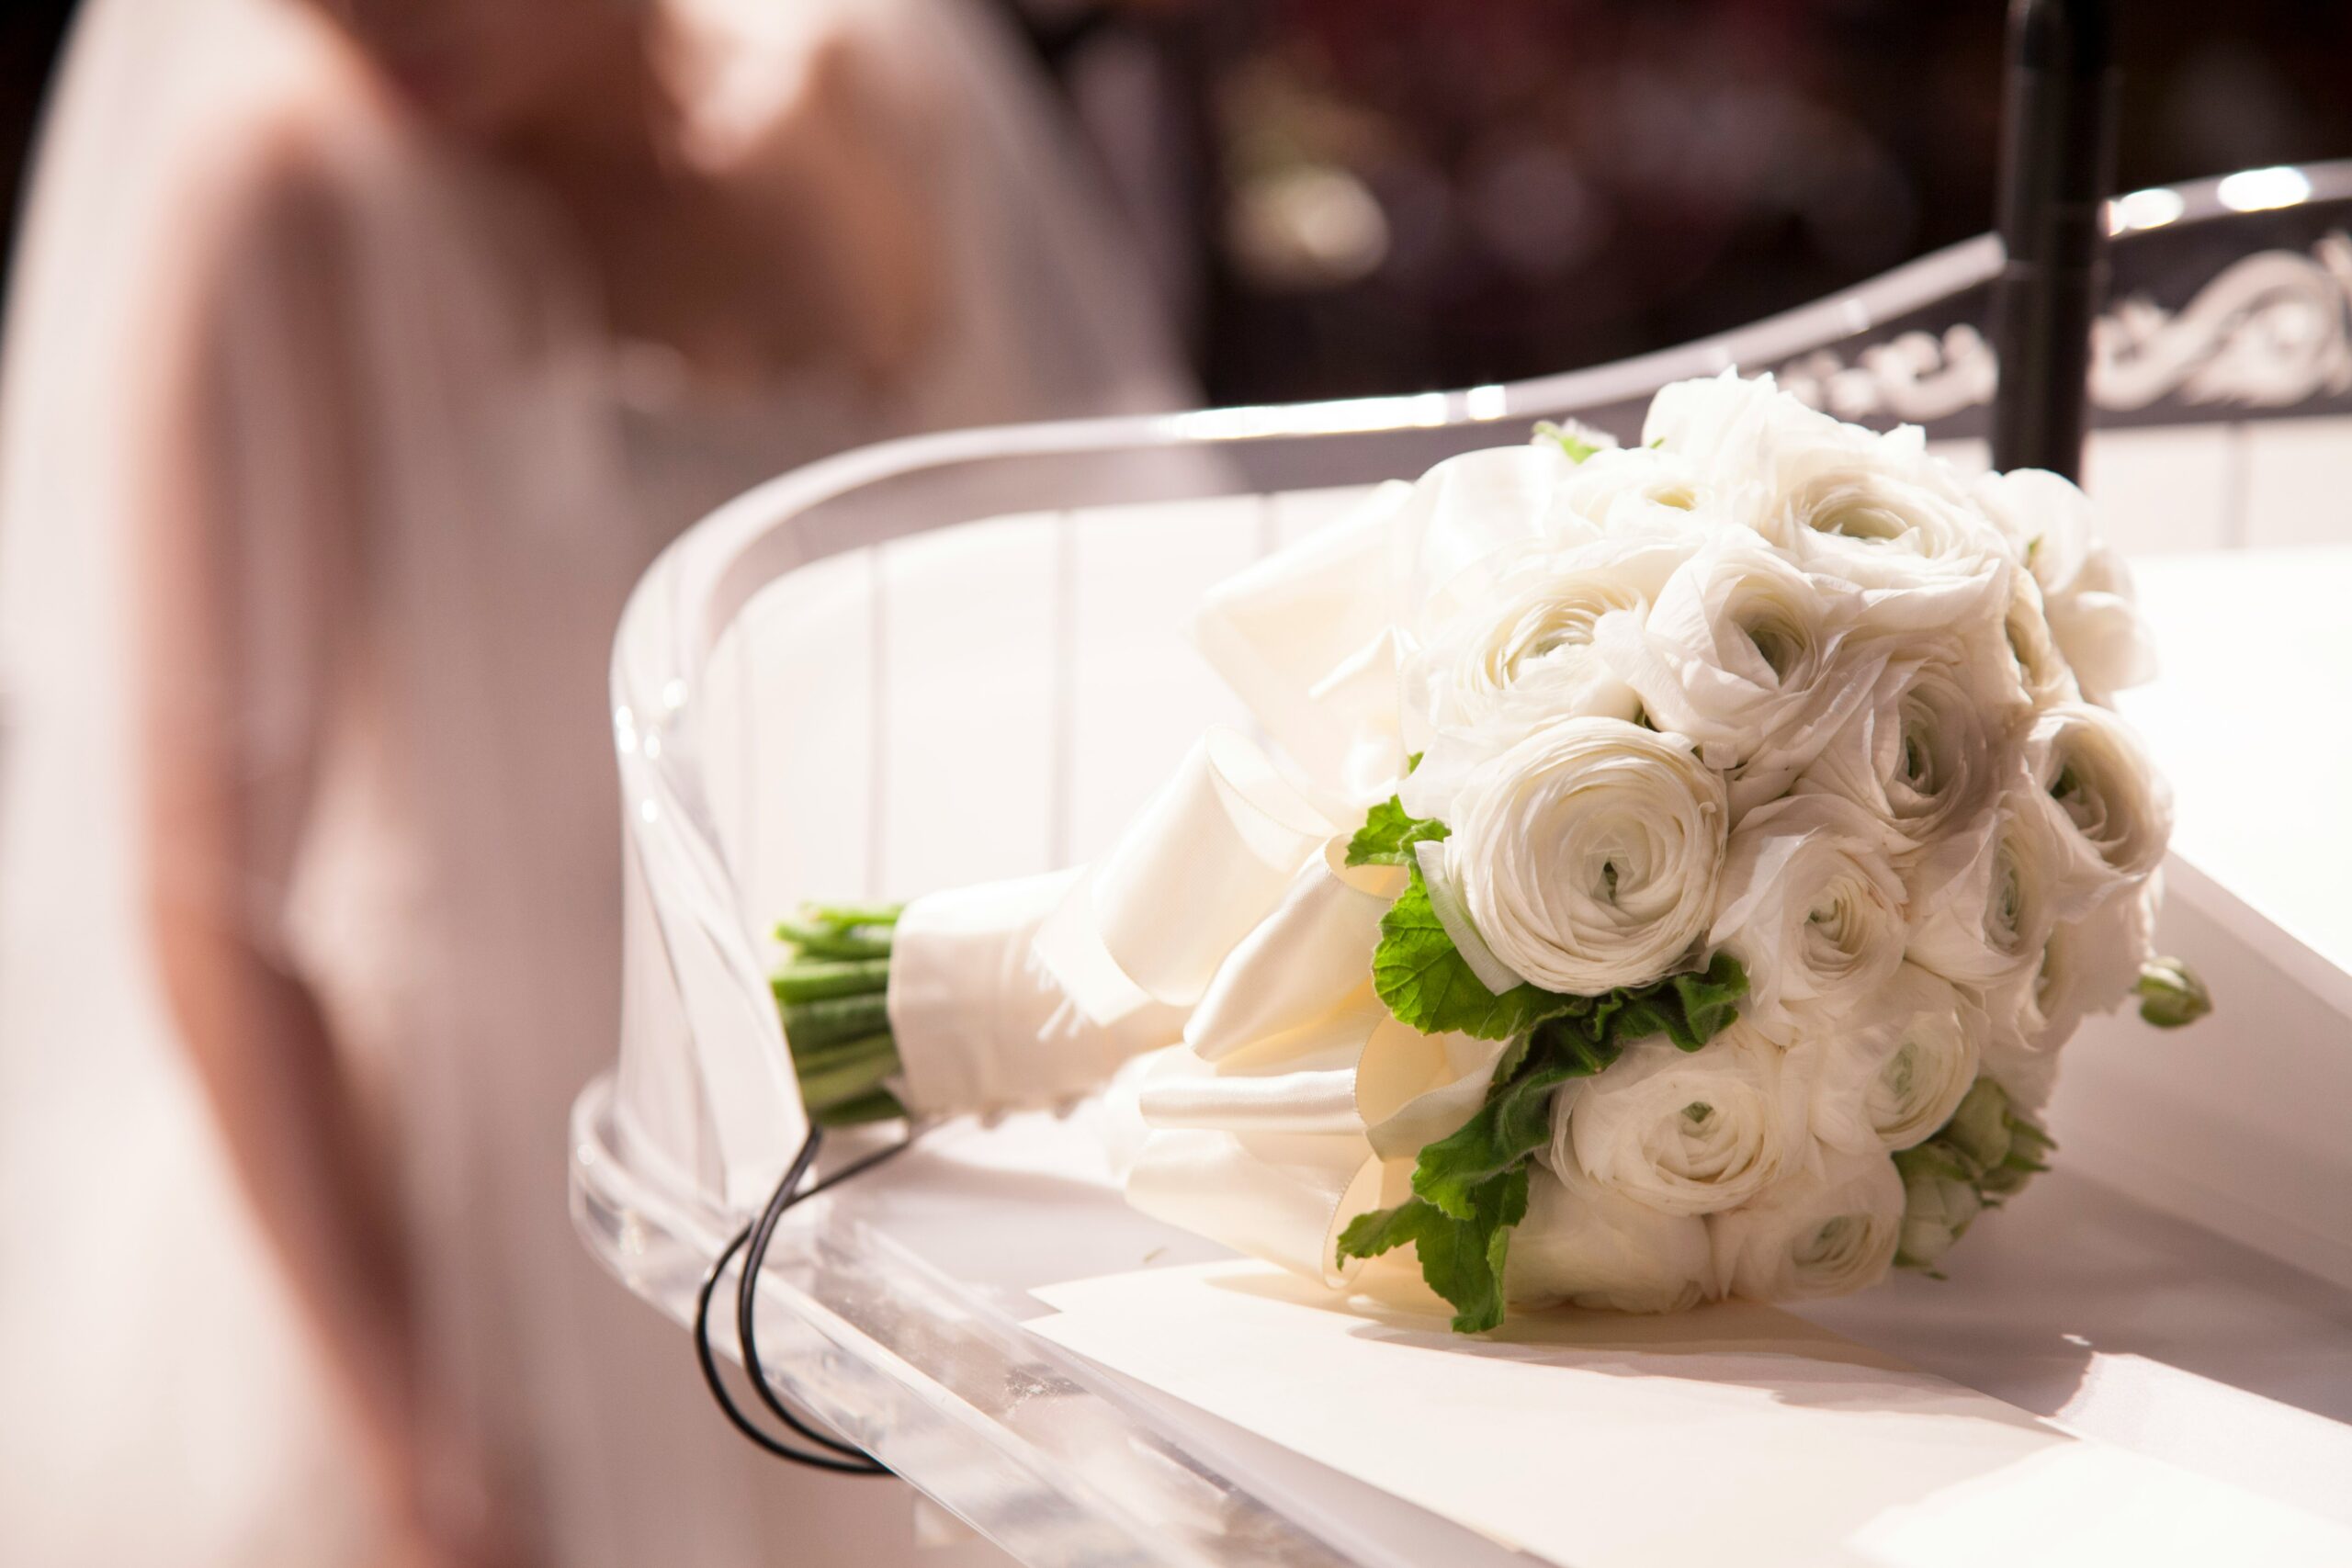 How to preserve a wedding bouquet.